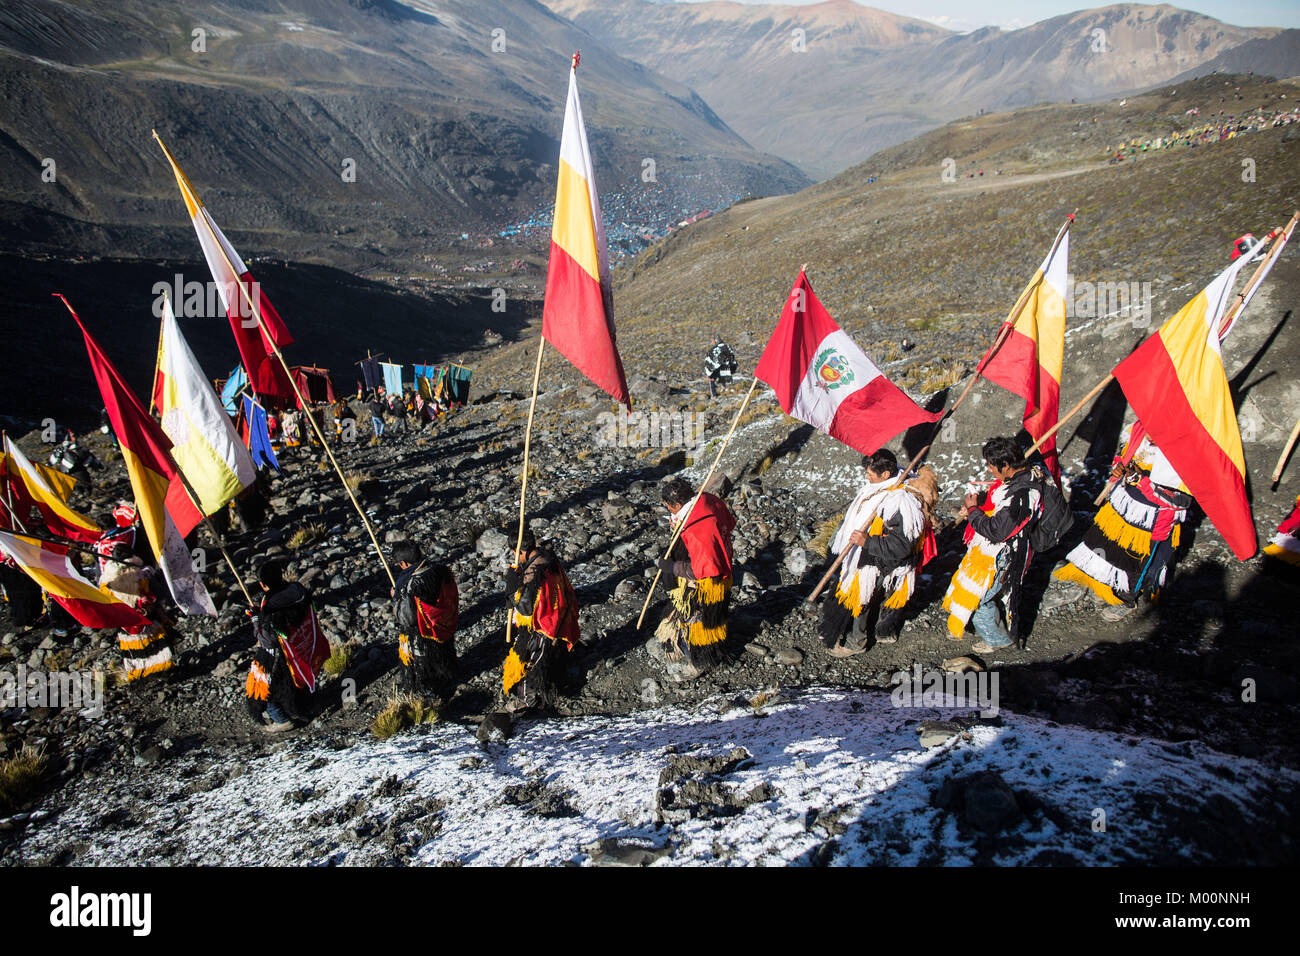 Cusco, Peru. 29th Dec, 2017. Members of the Nation Acomayo descends from Ausangate Mountain, at 6362m, the snow covered has been affected by the climate change, years ago this area is covered by snow.Quyllur Rit'i or Star Snow Festival is a spiritual and religious festival held Annually at the Sinakara Valley in the Cusco Region of Peru. Groups of Quero indigenous people climb Ausangate Mountain, at 6362m, in search of the Snow Star Which is reputedly buried Within the mountain.According to the chroniclers, the Qoyllur Rit'i is the Christ that the Church sent painted on a rock at almost Stock Photo